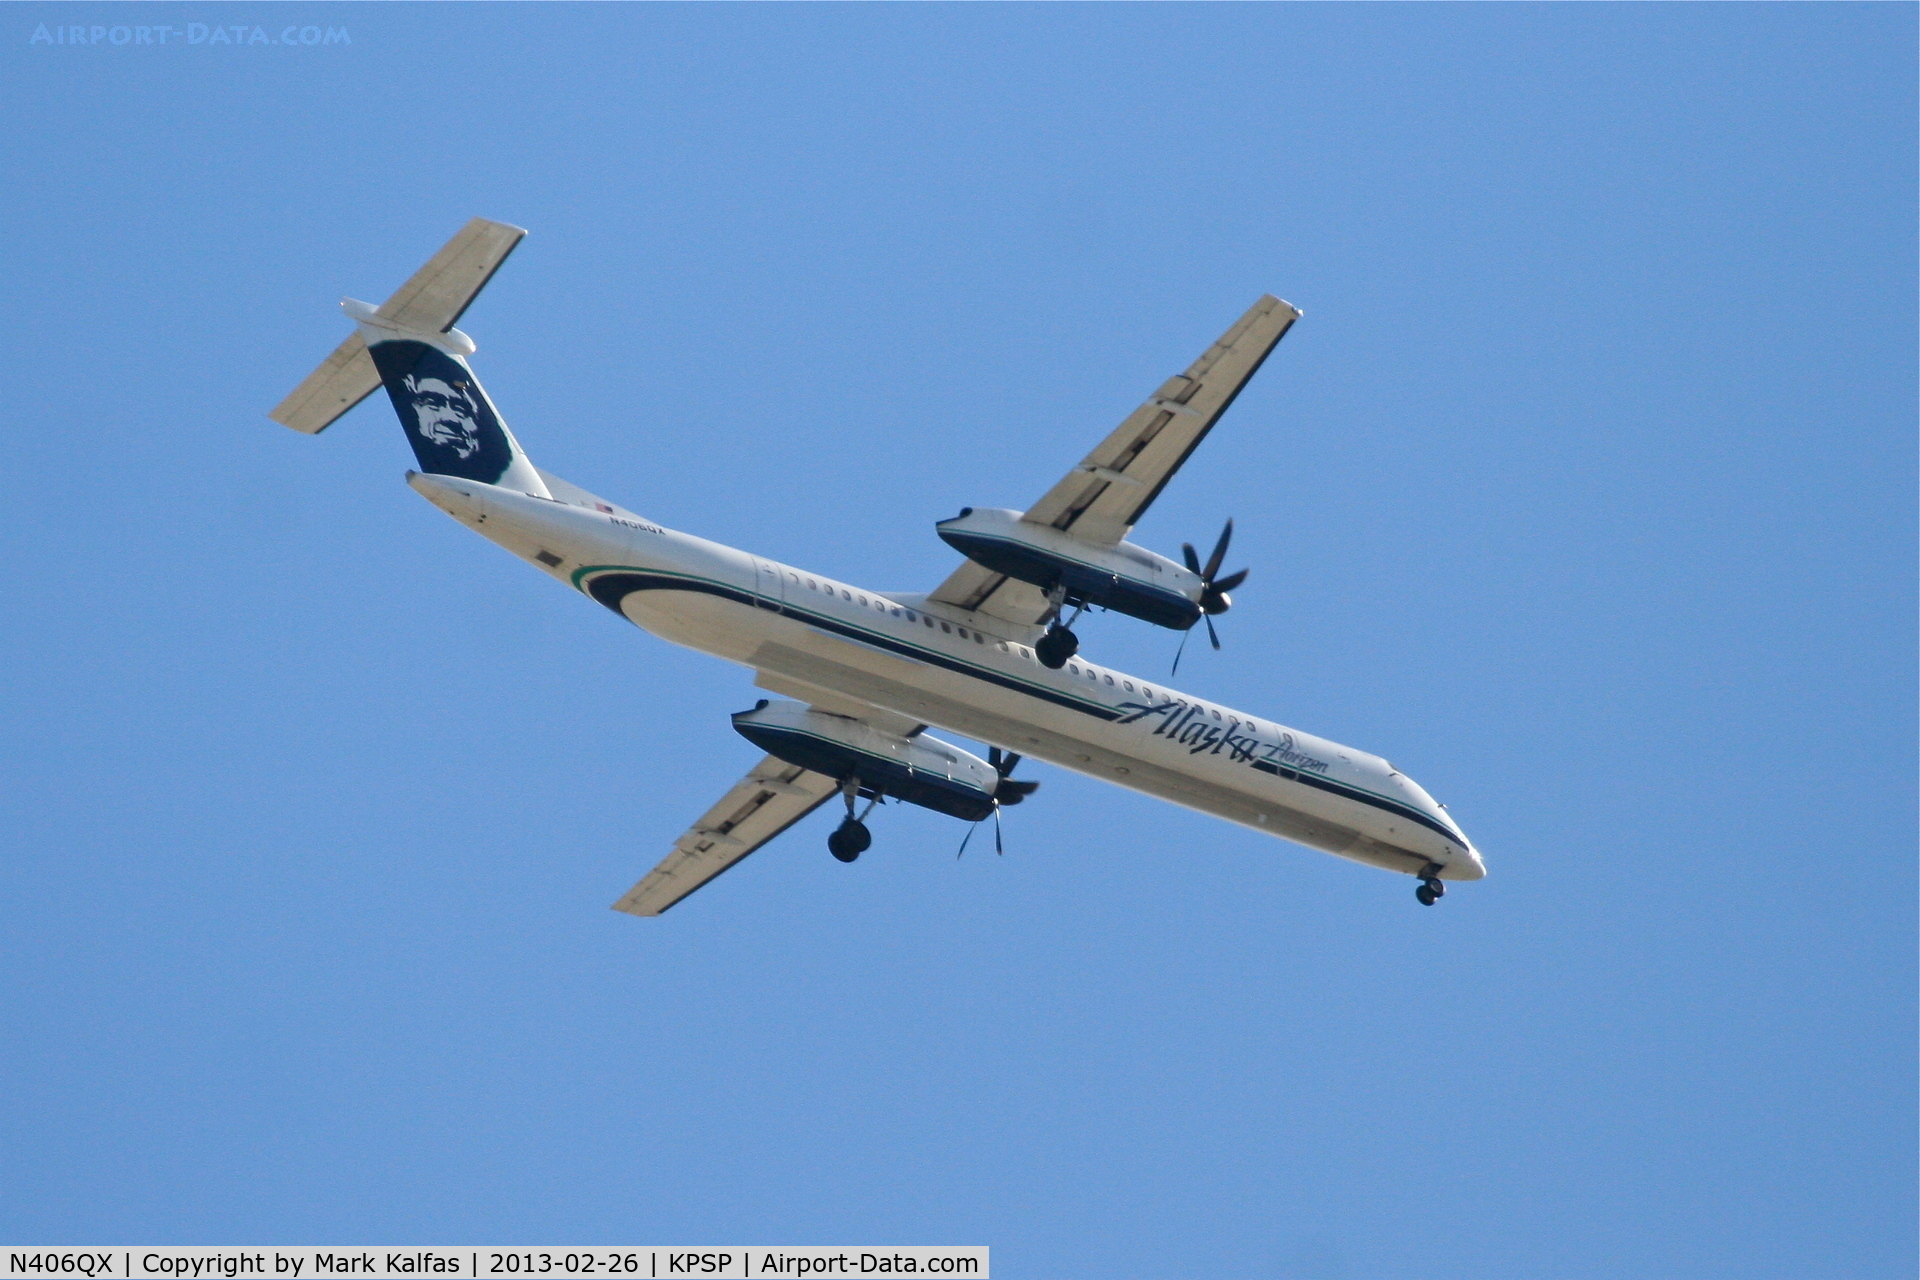 N406QX, 2001 Bombardier DHC-8-402 Dash 8 C/N 4048, Horizon Air Bombardier DHC-8-402, QXE2377 on approach for RWY 31L KPSP, arriving from from KSJC.